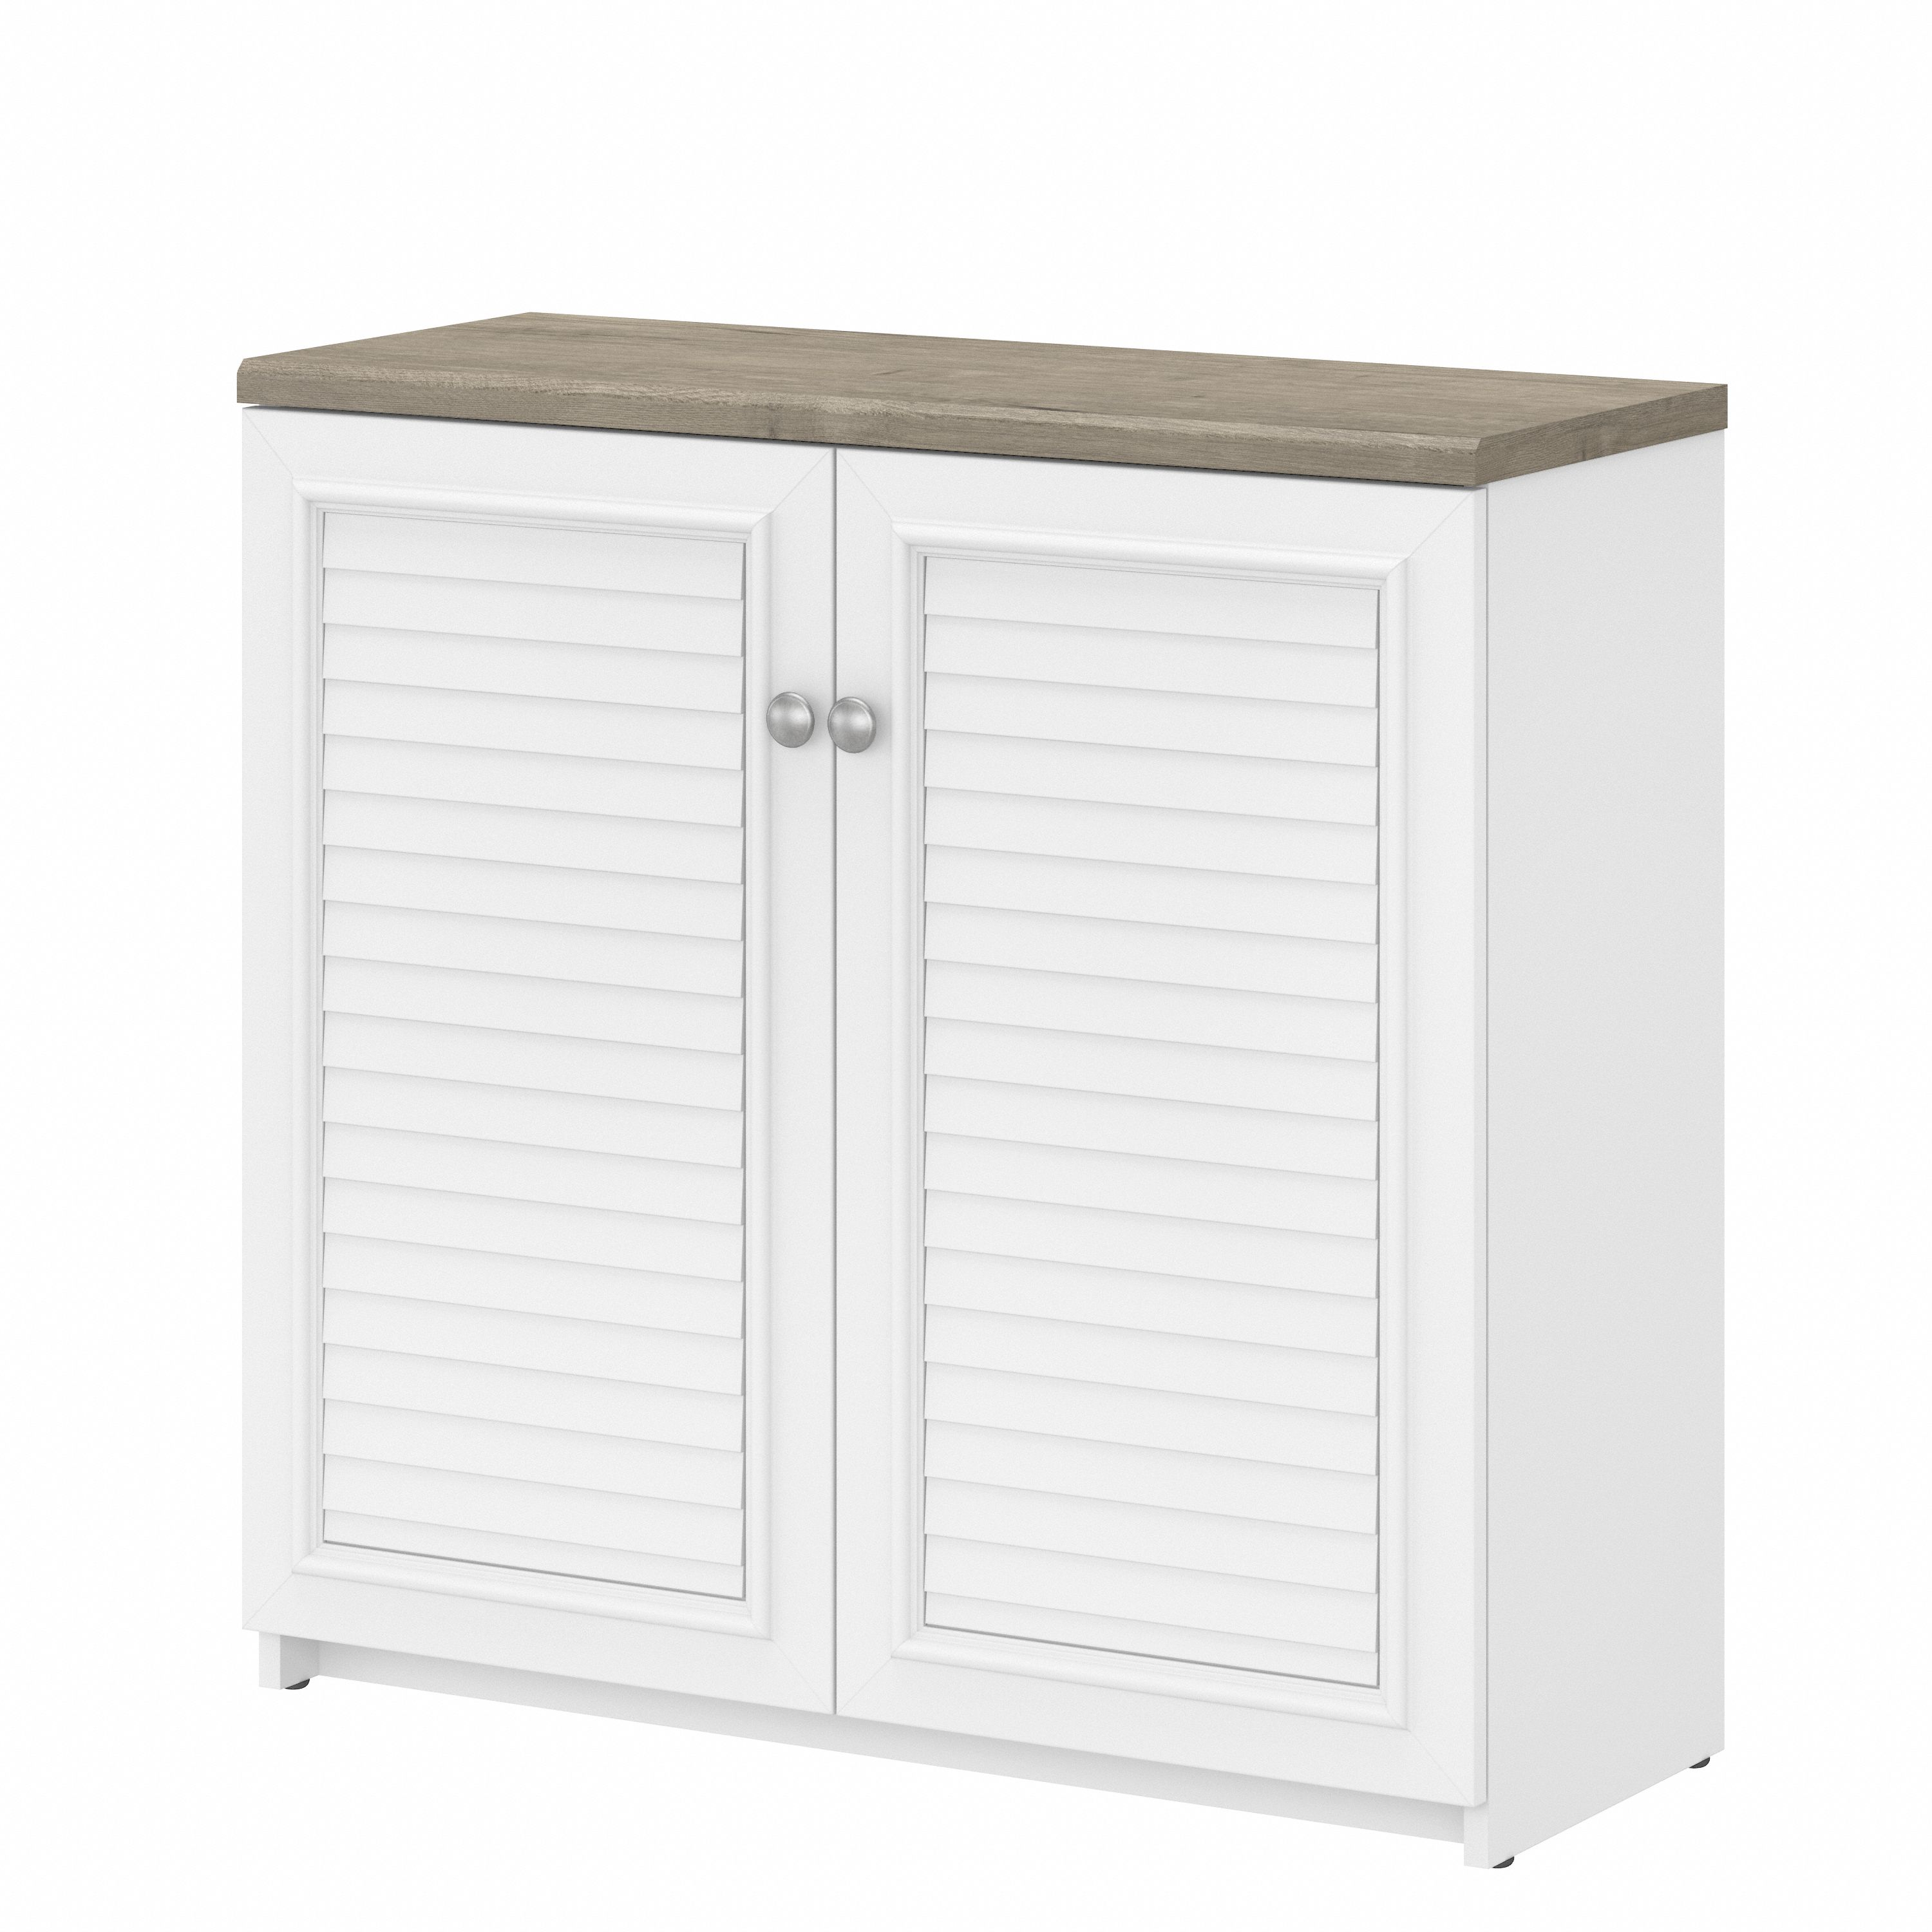 Shop Bush Furniture Fairview Small Storage Cabinet with Doors and Shelves 02 WC53696-03 #color_shiplap gray/pure white